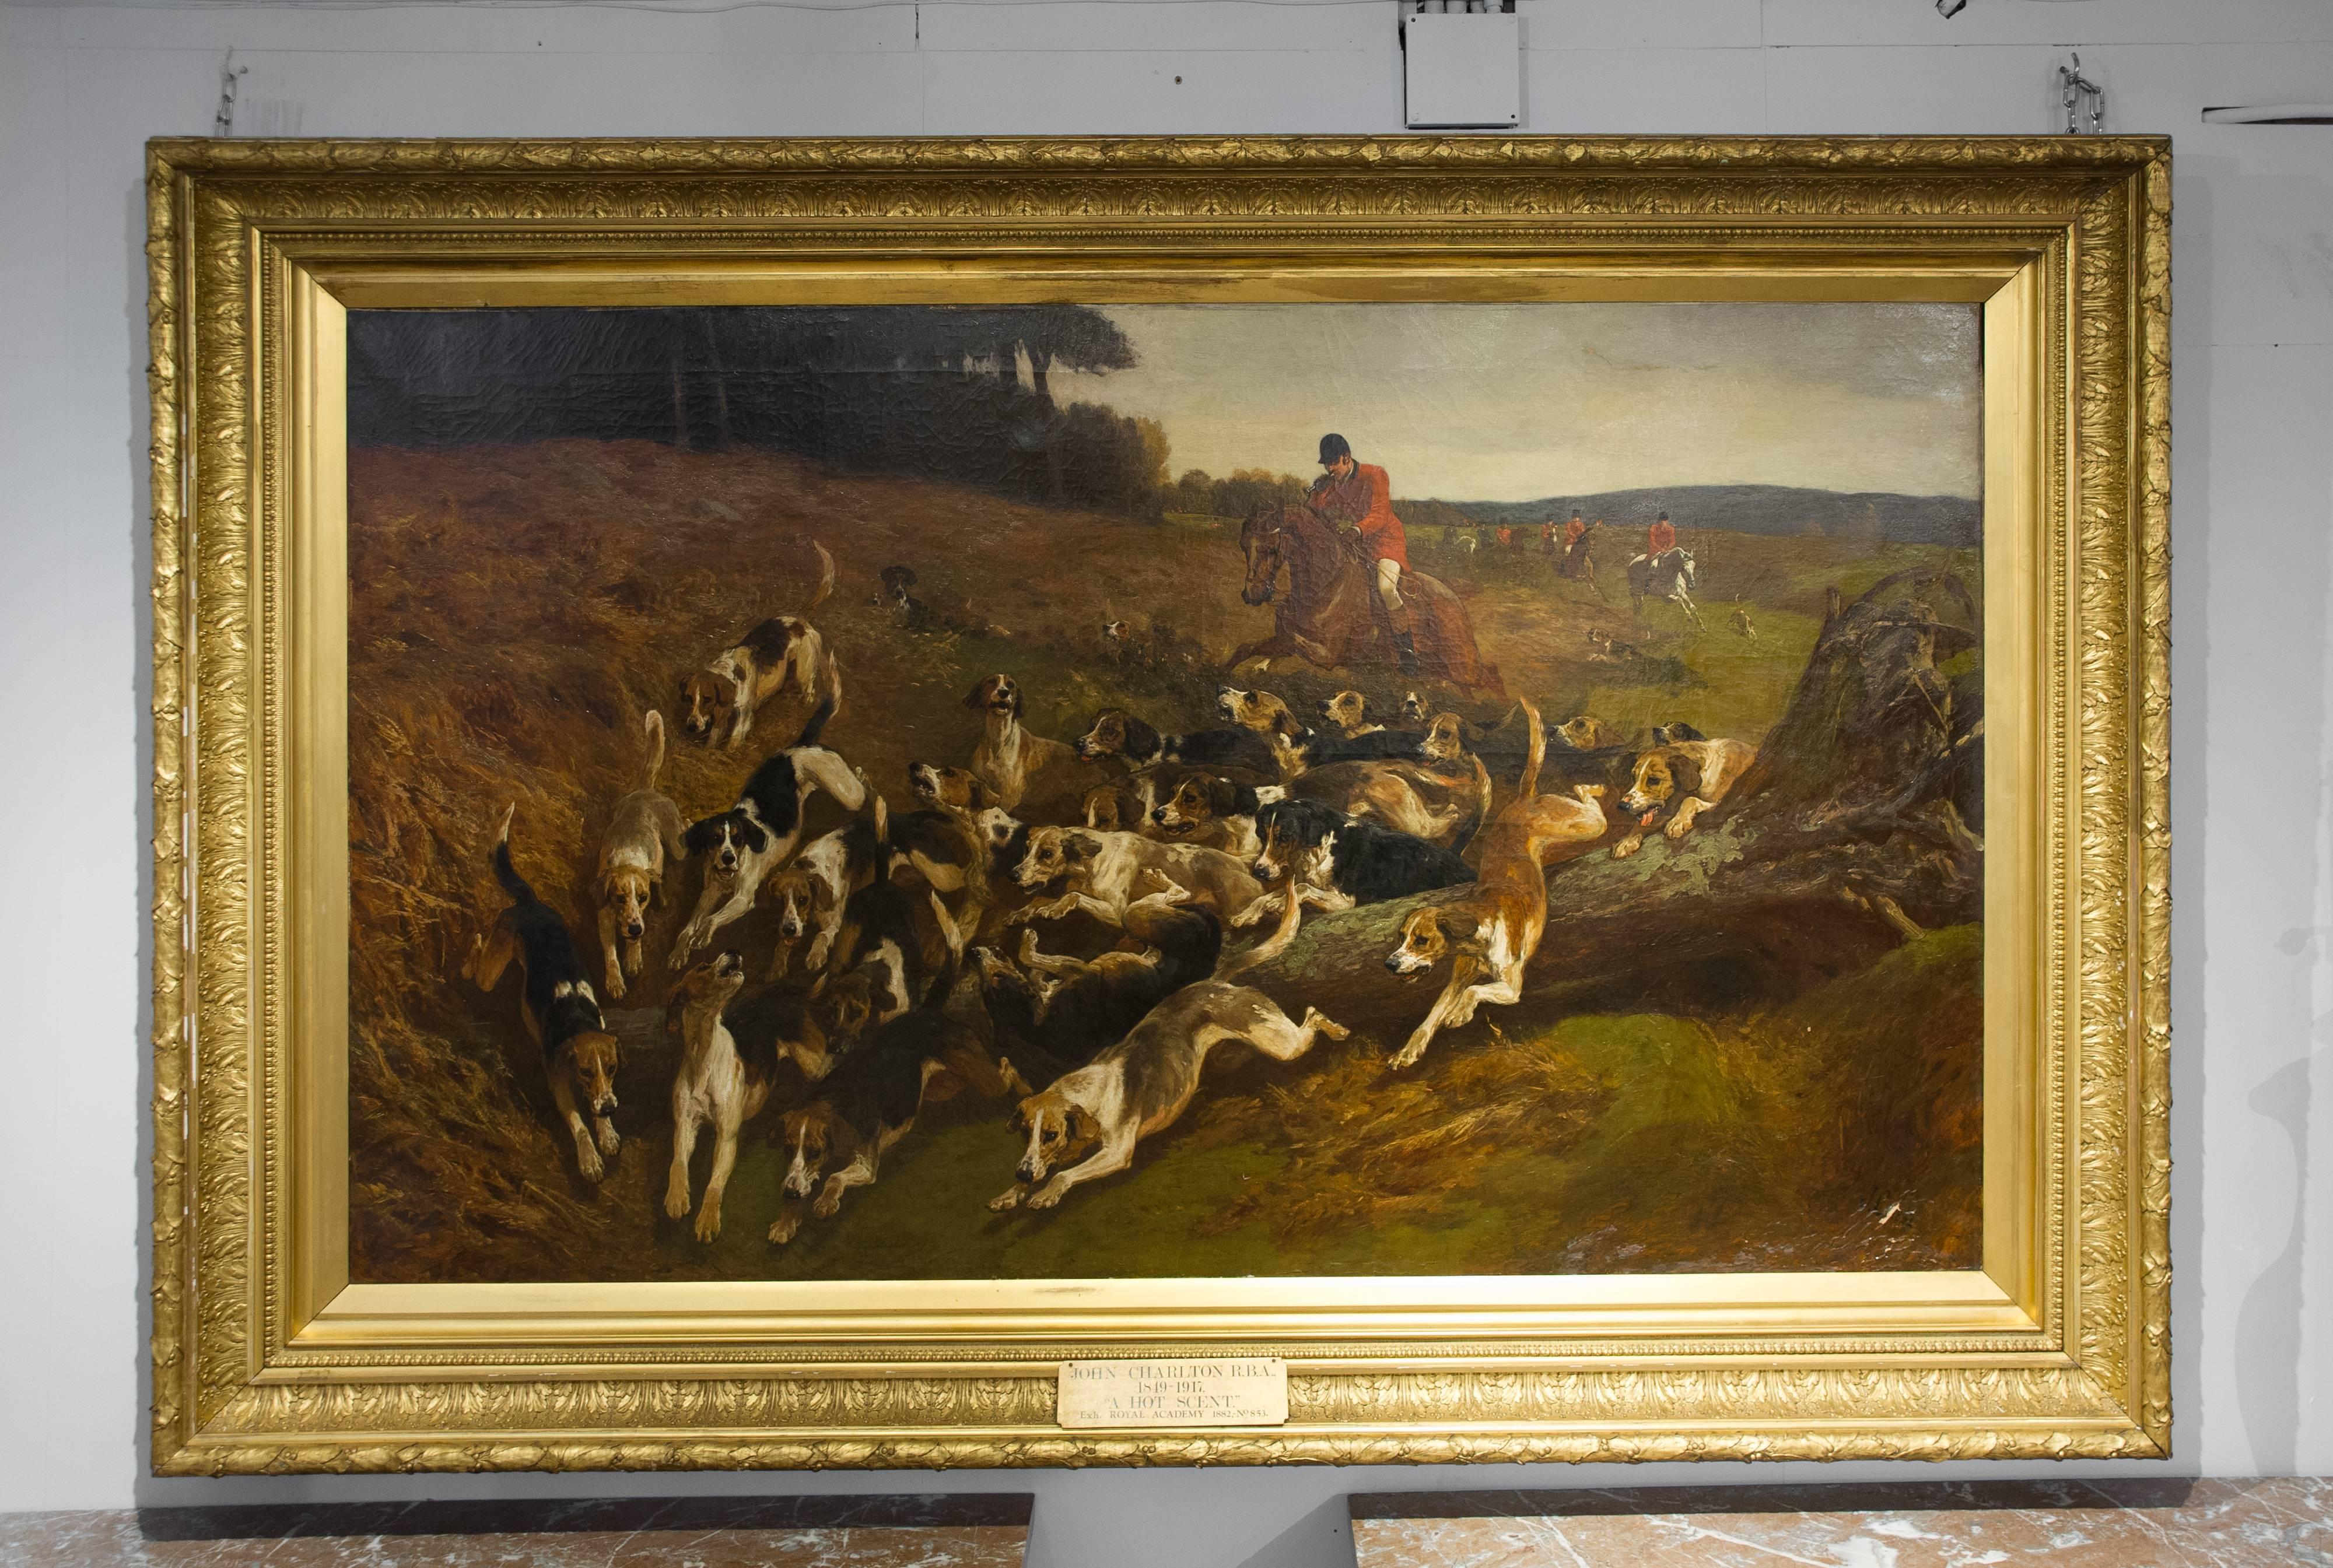 This particular painting is titled ‘A Hot Scent’ and was done in 1882 for exhibit at the Royal Academy, depicting a fox hunting scene with the signature of the artist in the lower right hand corner. This immense and outstanding work is framed in the